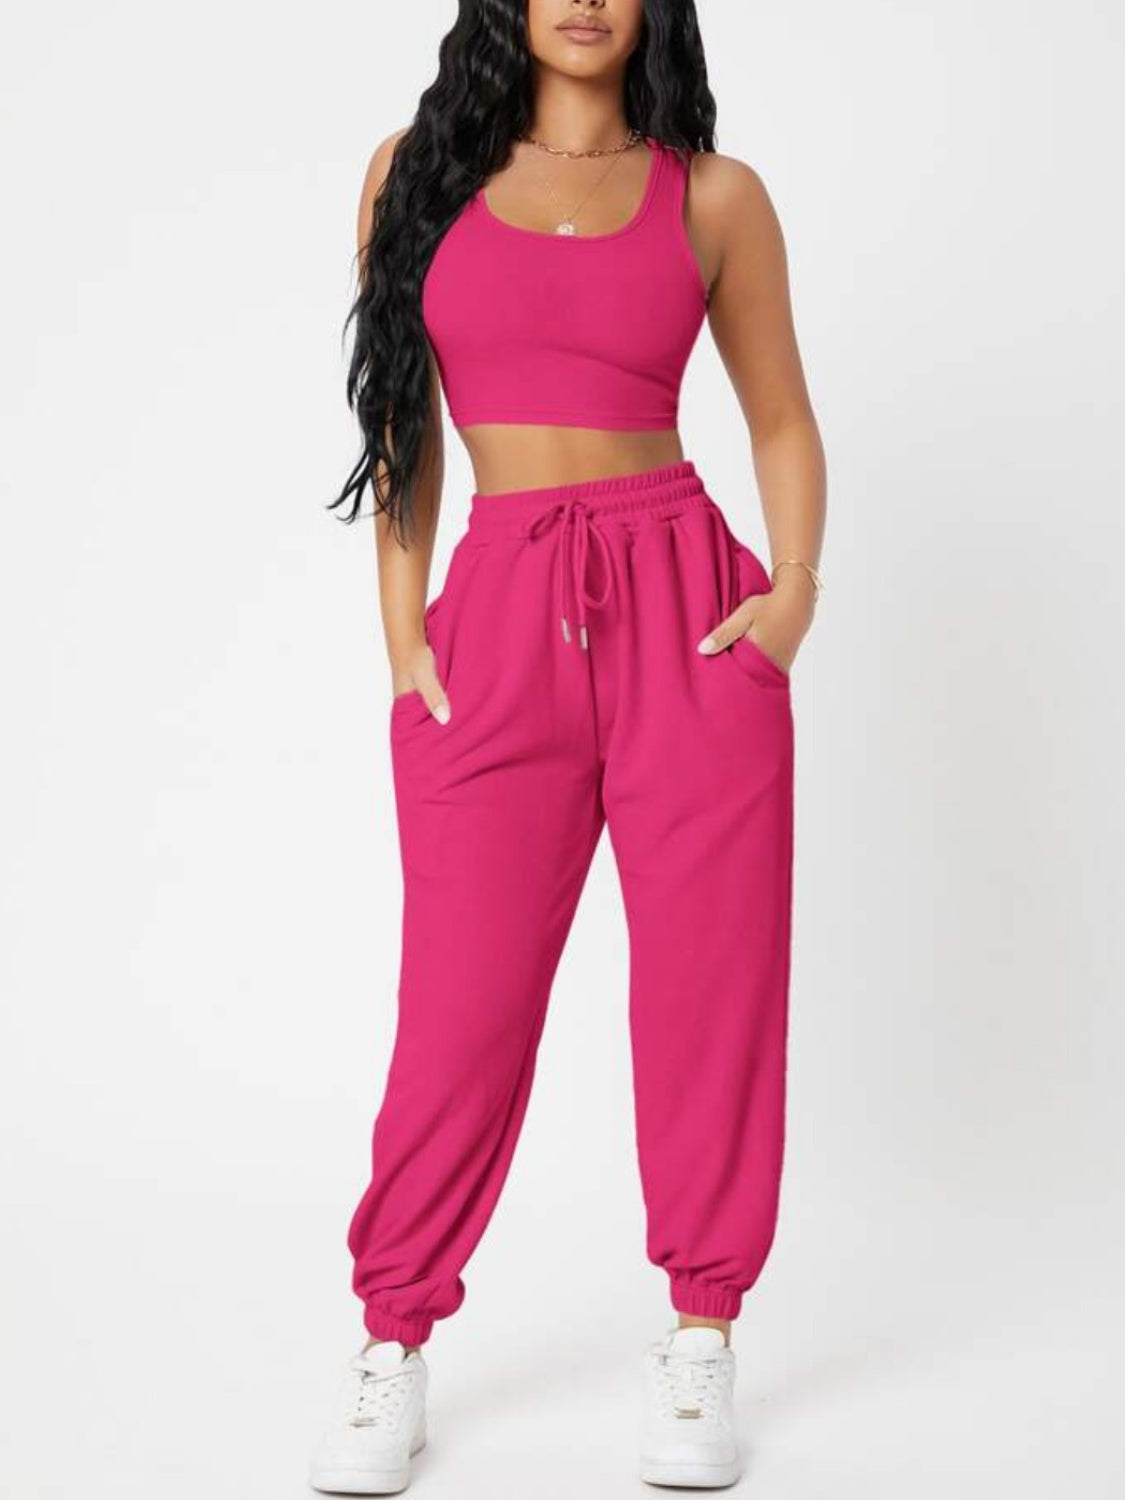 Wide Strap Top and Drawstring Joggers Set Bottom wear